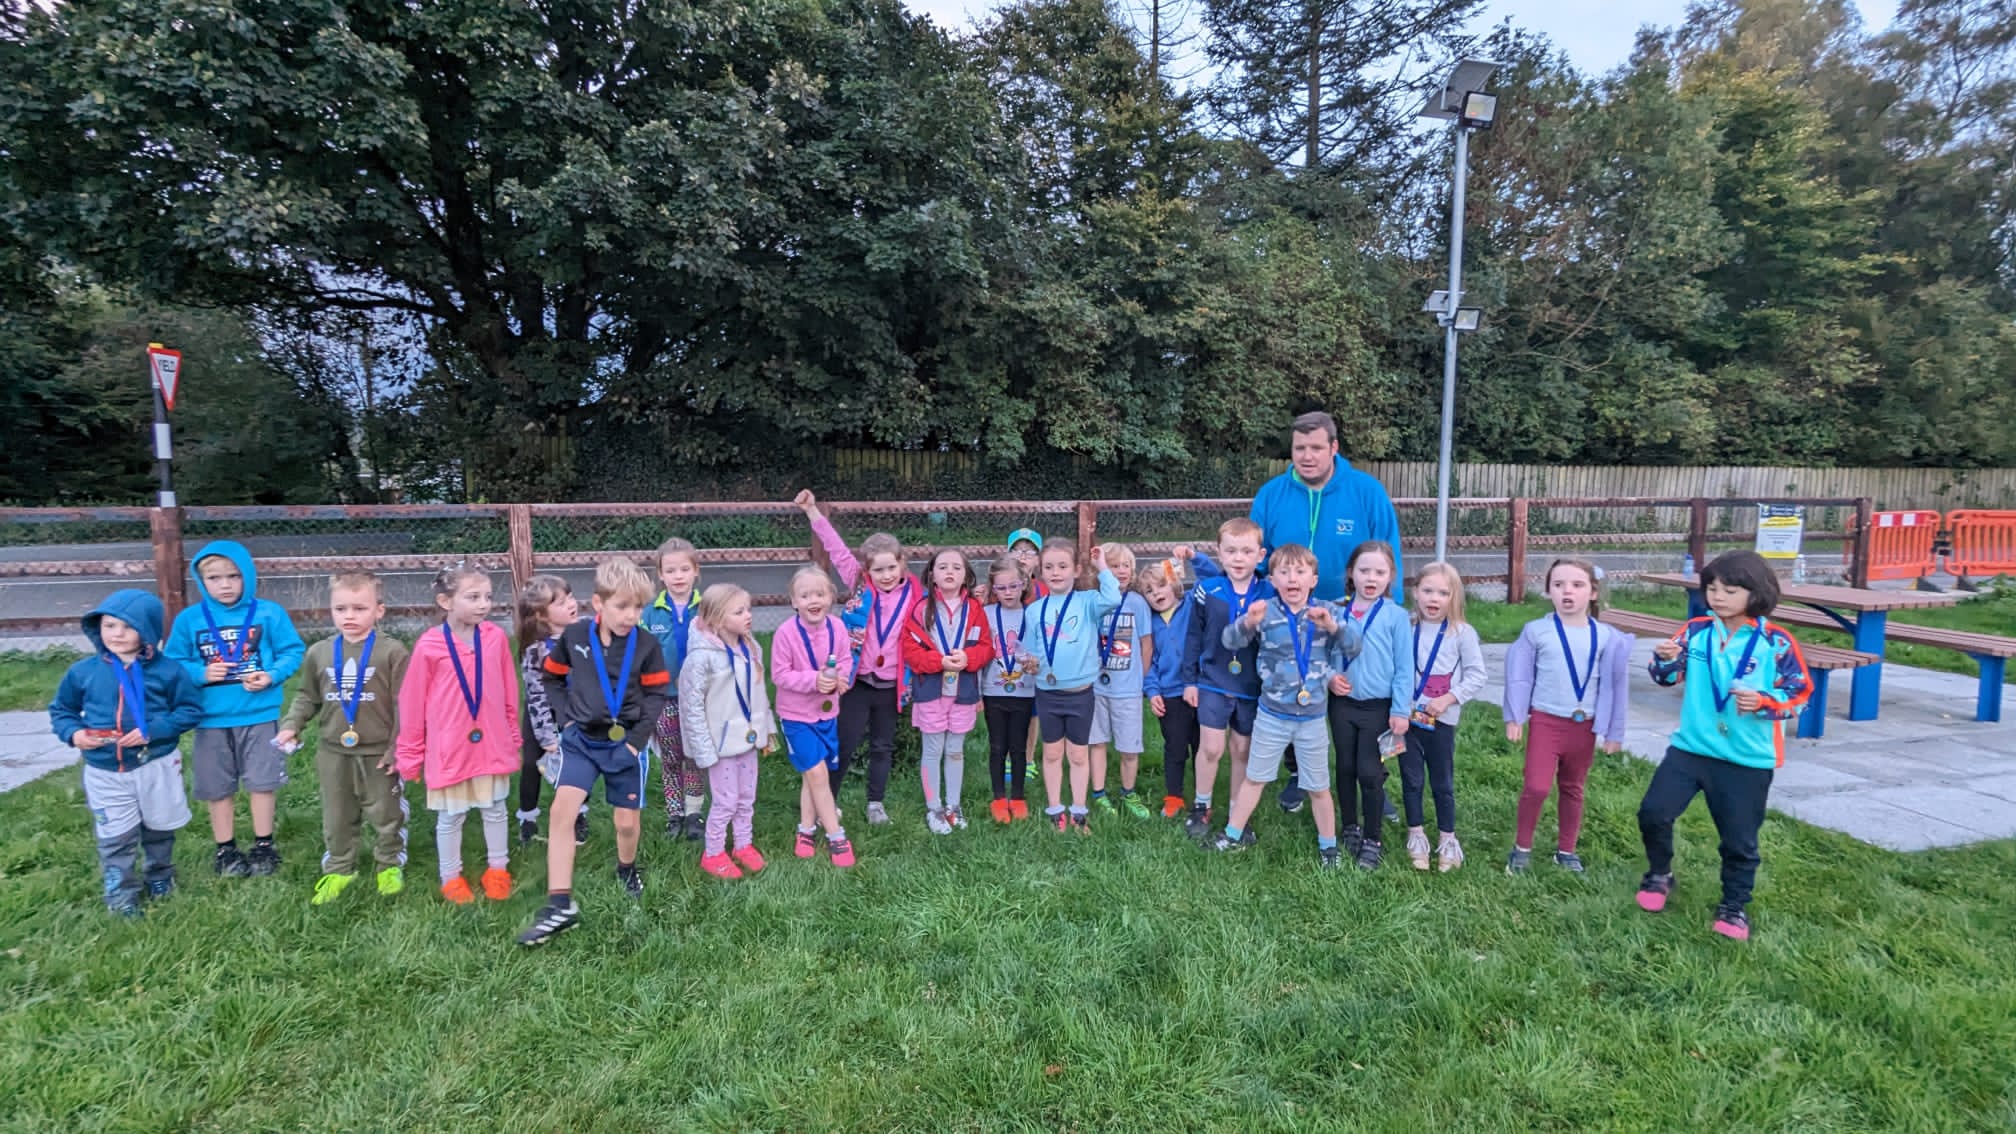 Final Training Session for the Kilbride Tots for the year…in photos…pizza, chips and medals marks the end of season for the Tots, U7’s and U9’s…Well done all…